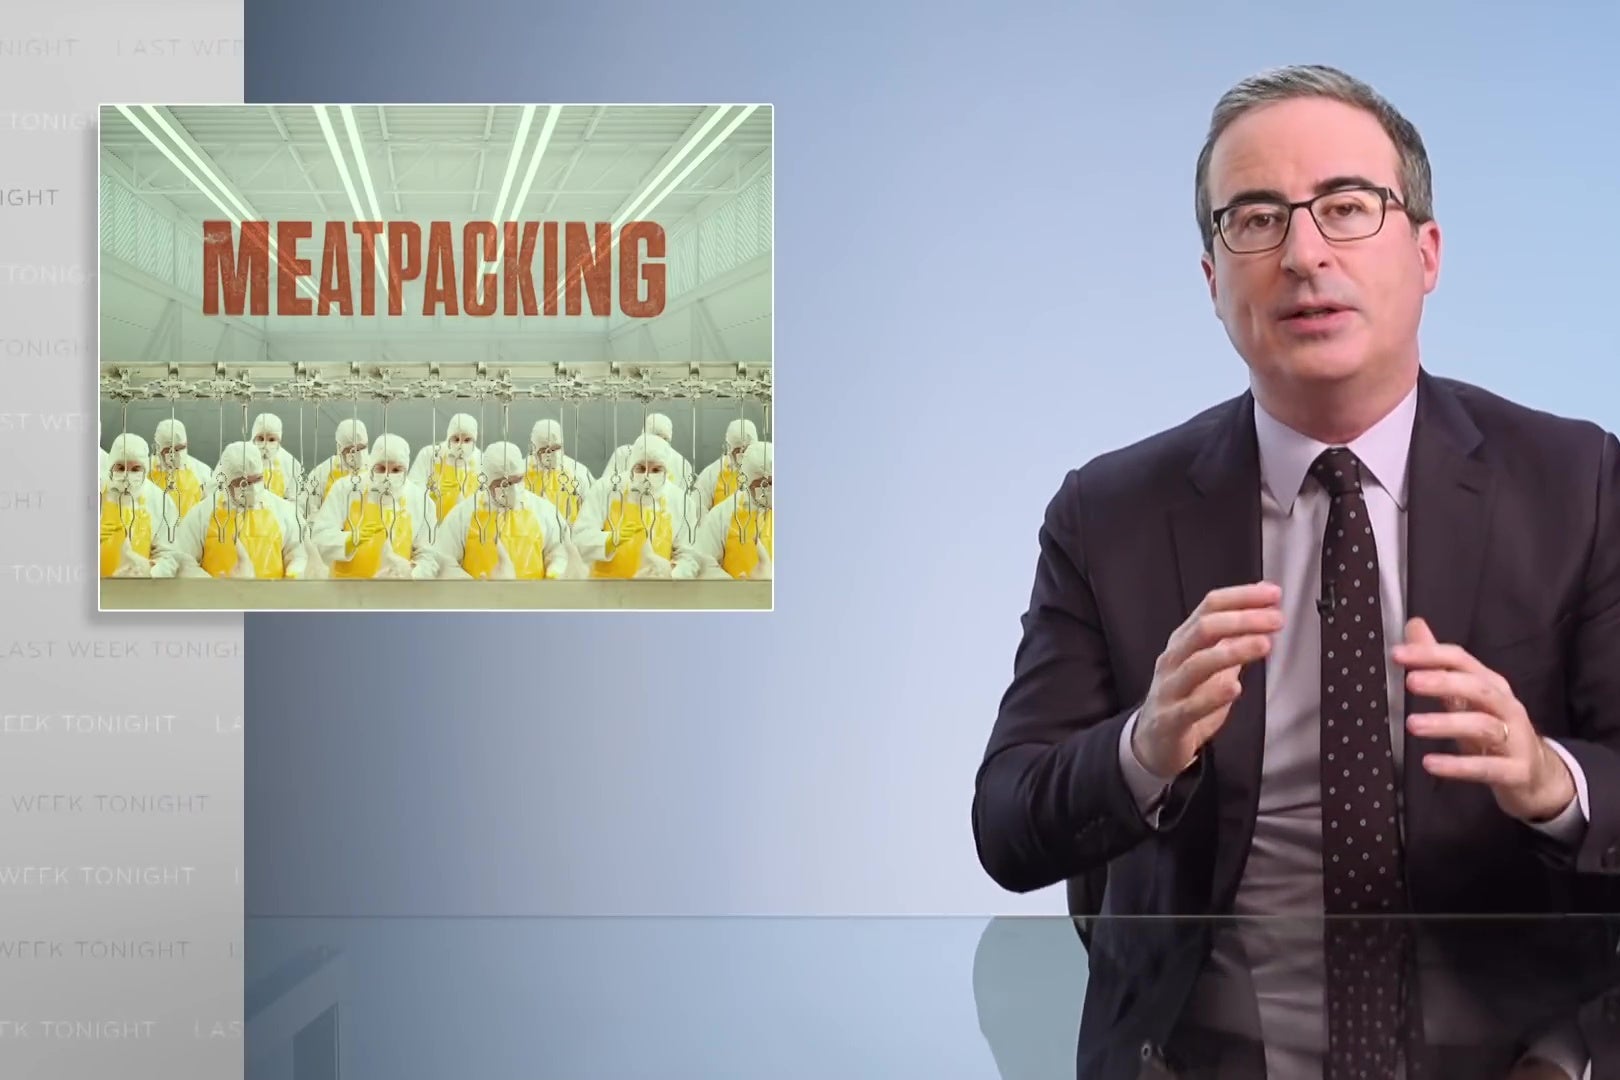 John Oliver sits behind a glass-topped anchorman desk; a graphic reading "MEATPACKING" is displayed behind him.